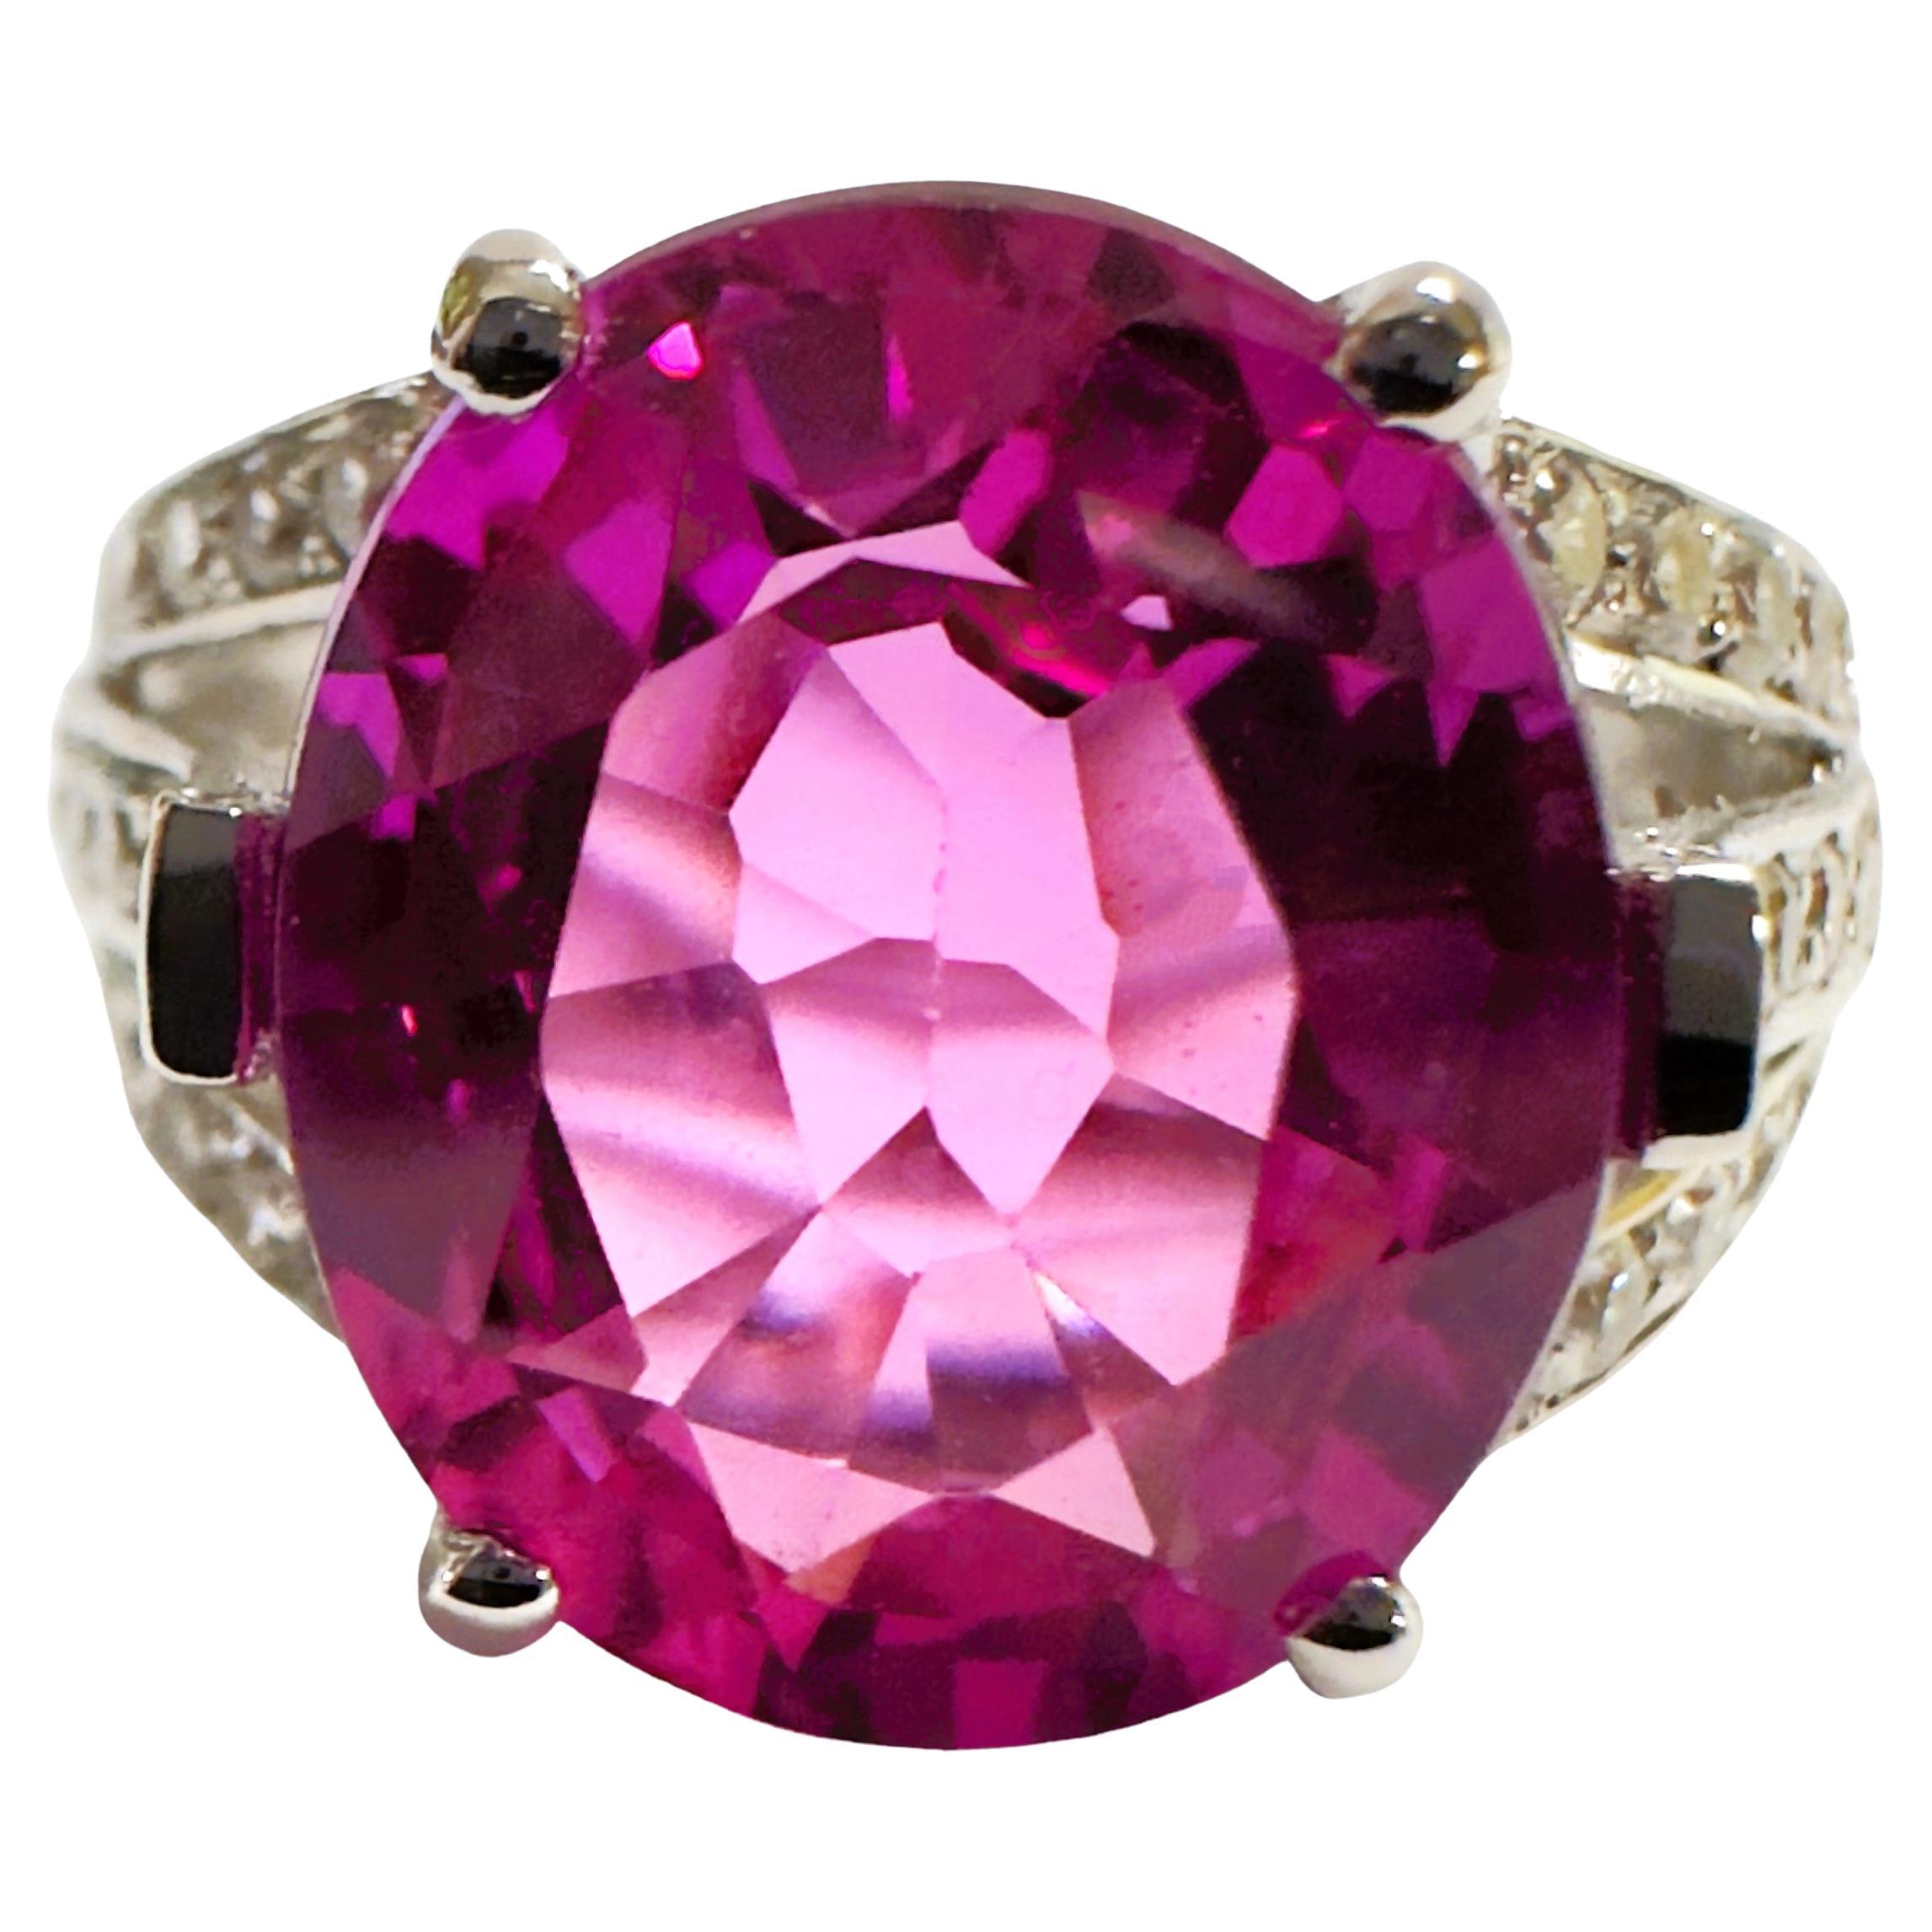 New African 8.0 Ct Pink Sapphire Sterling Ring Size 6 For Sale